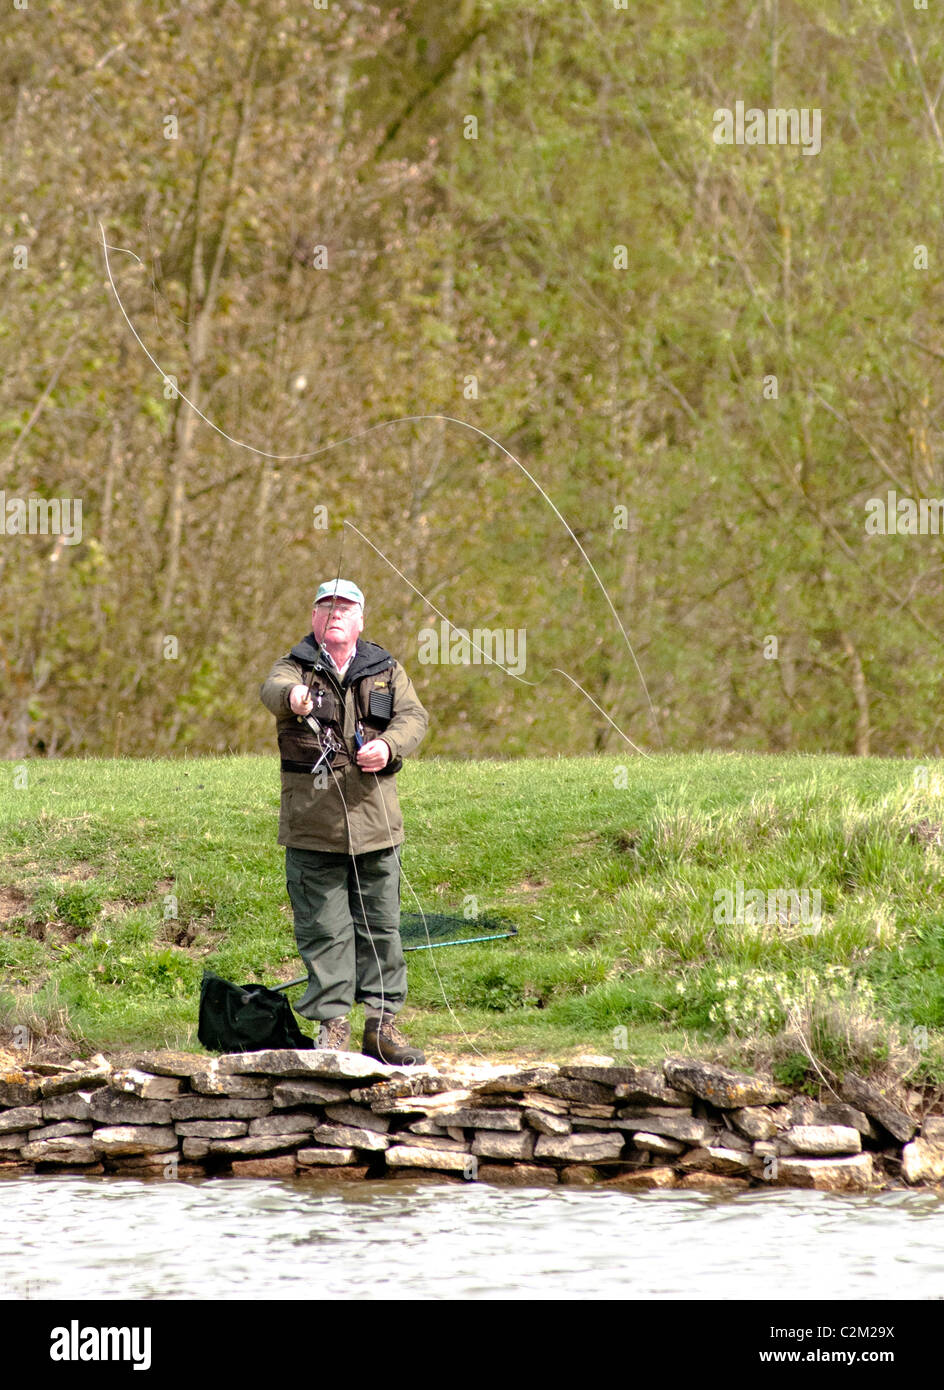 A fly fisherman casting on a trout lake Stock Photo